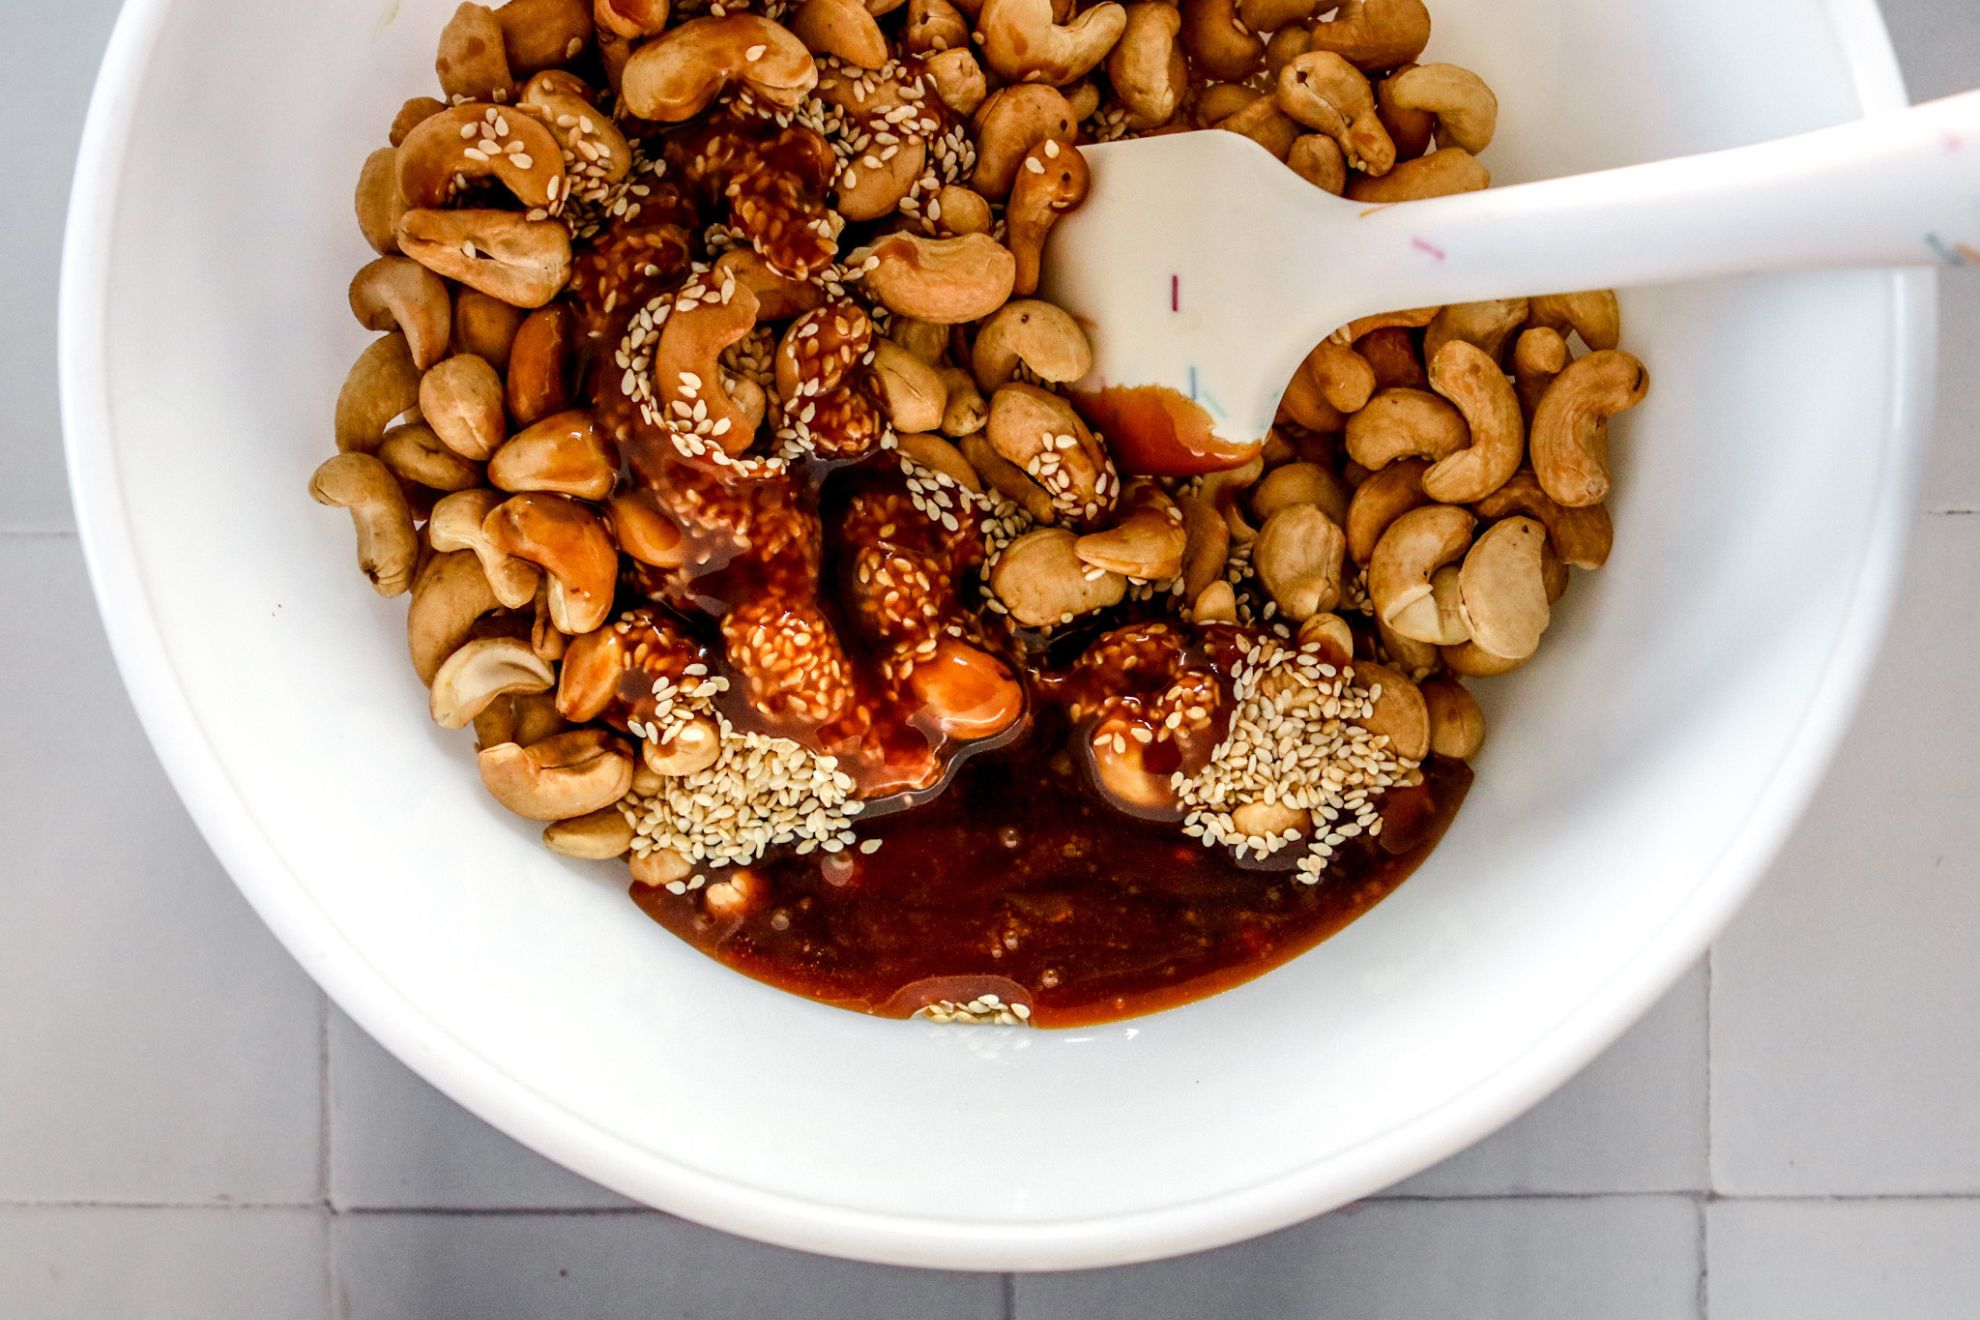 This is an overhead horizontal image of a large white bowl on a white tile surface. In the bowl are cashews, sesame seeds and a caramel sauce. A white rubber spatula is in the bowl with the handle leaning against the side of the bowl pointing to the top right of the image.